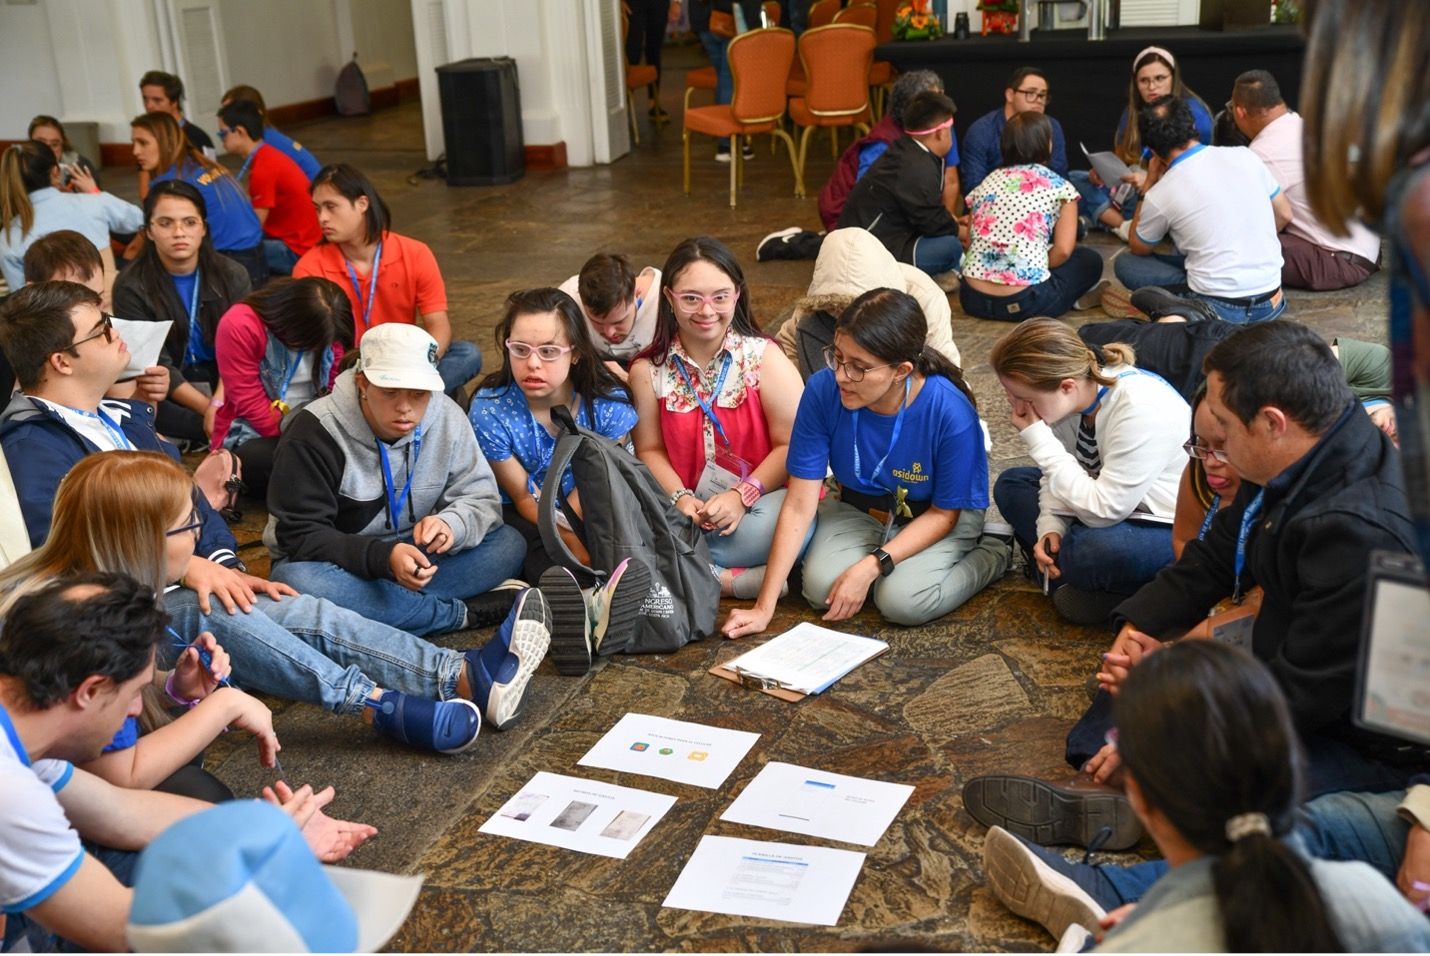 Image of people with Down syndrome sitting on the floor with an FIADOWN event coordinator